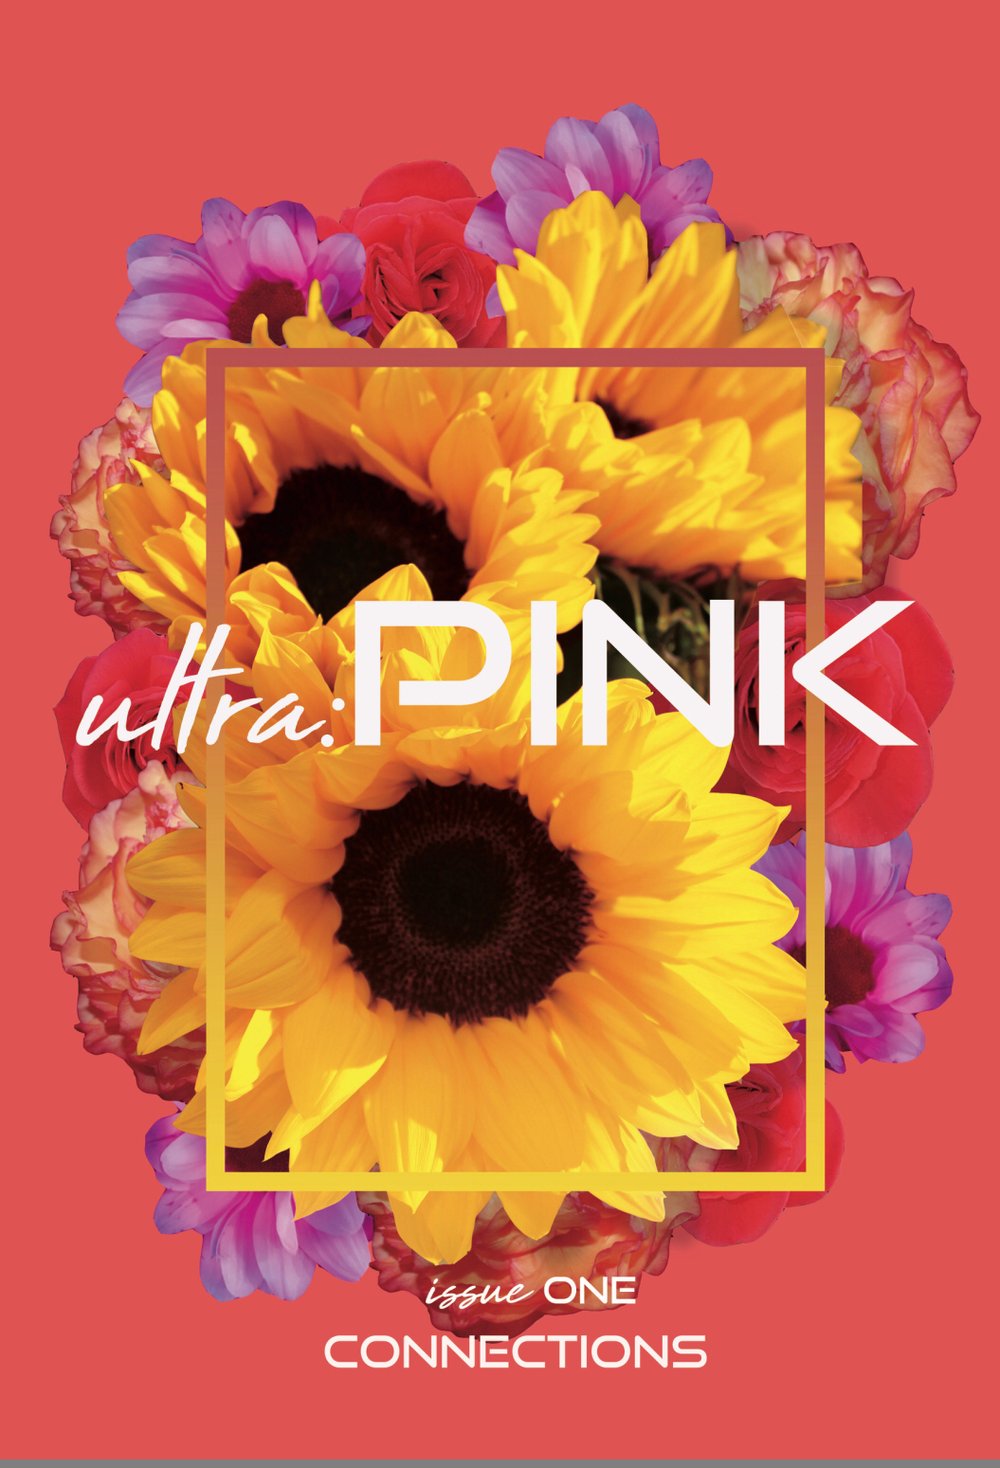 Image of ultra:PINK issue one